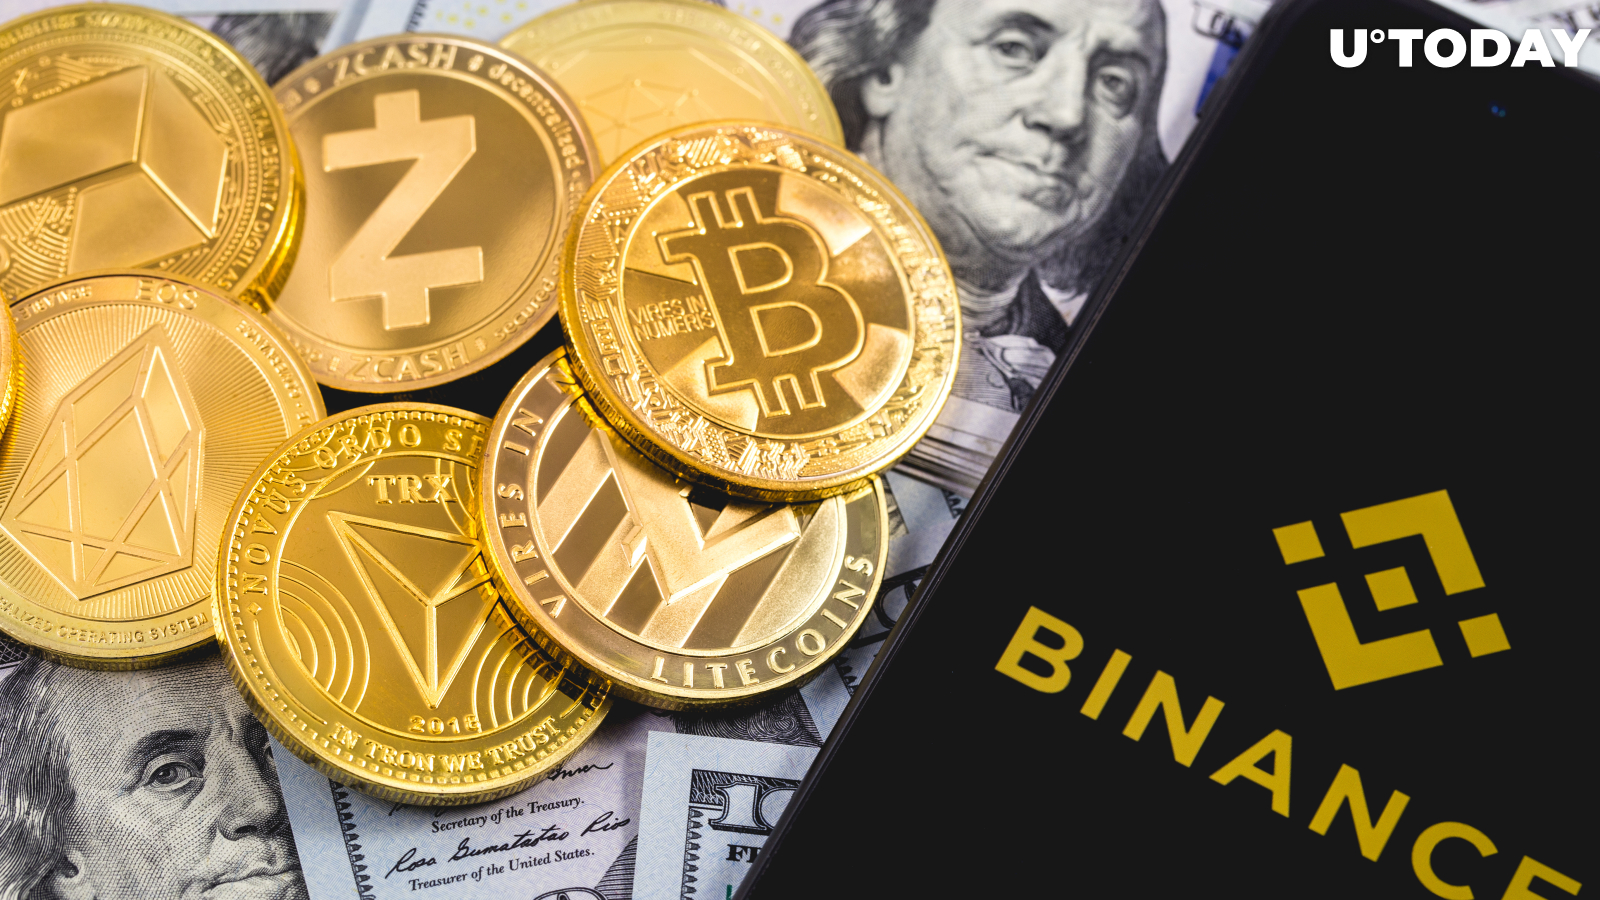 Binance to Cease All Crypto Services in Singapore by February 2022, Here's Why